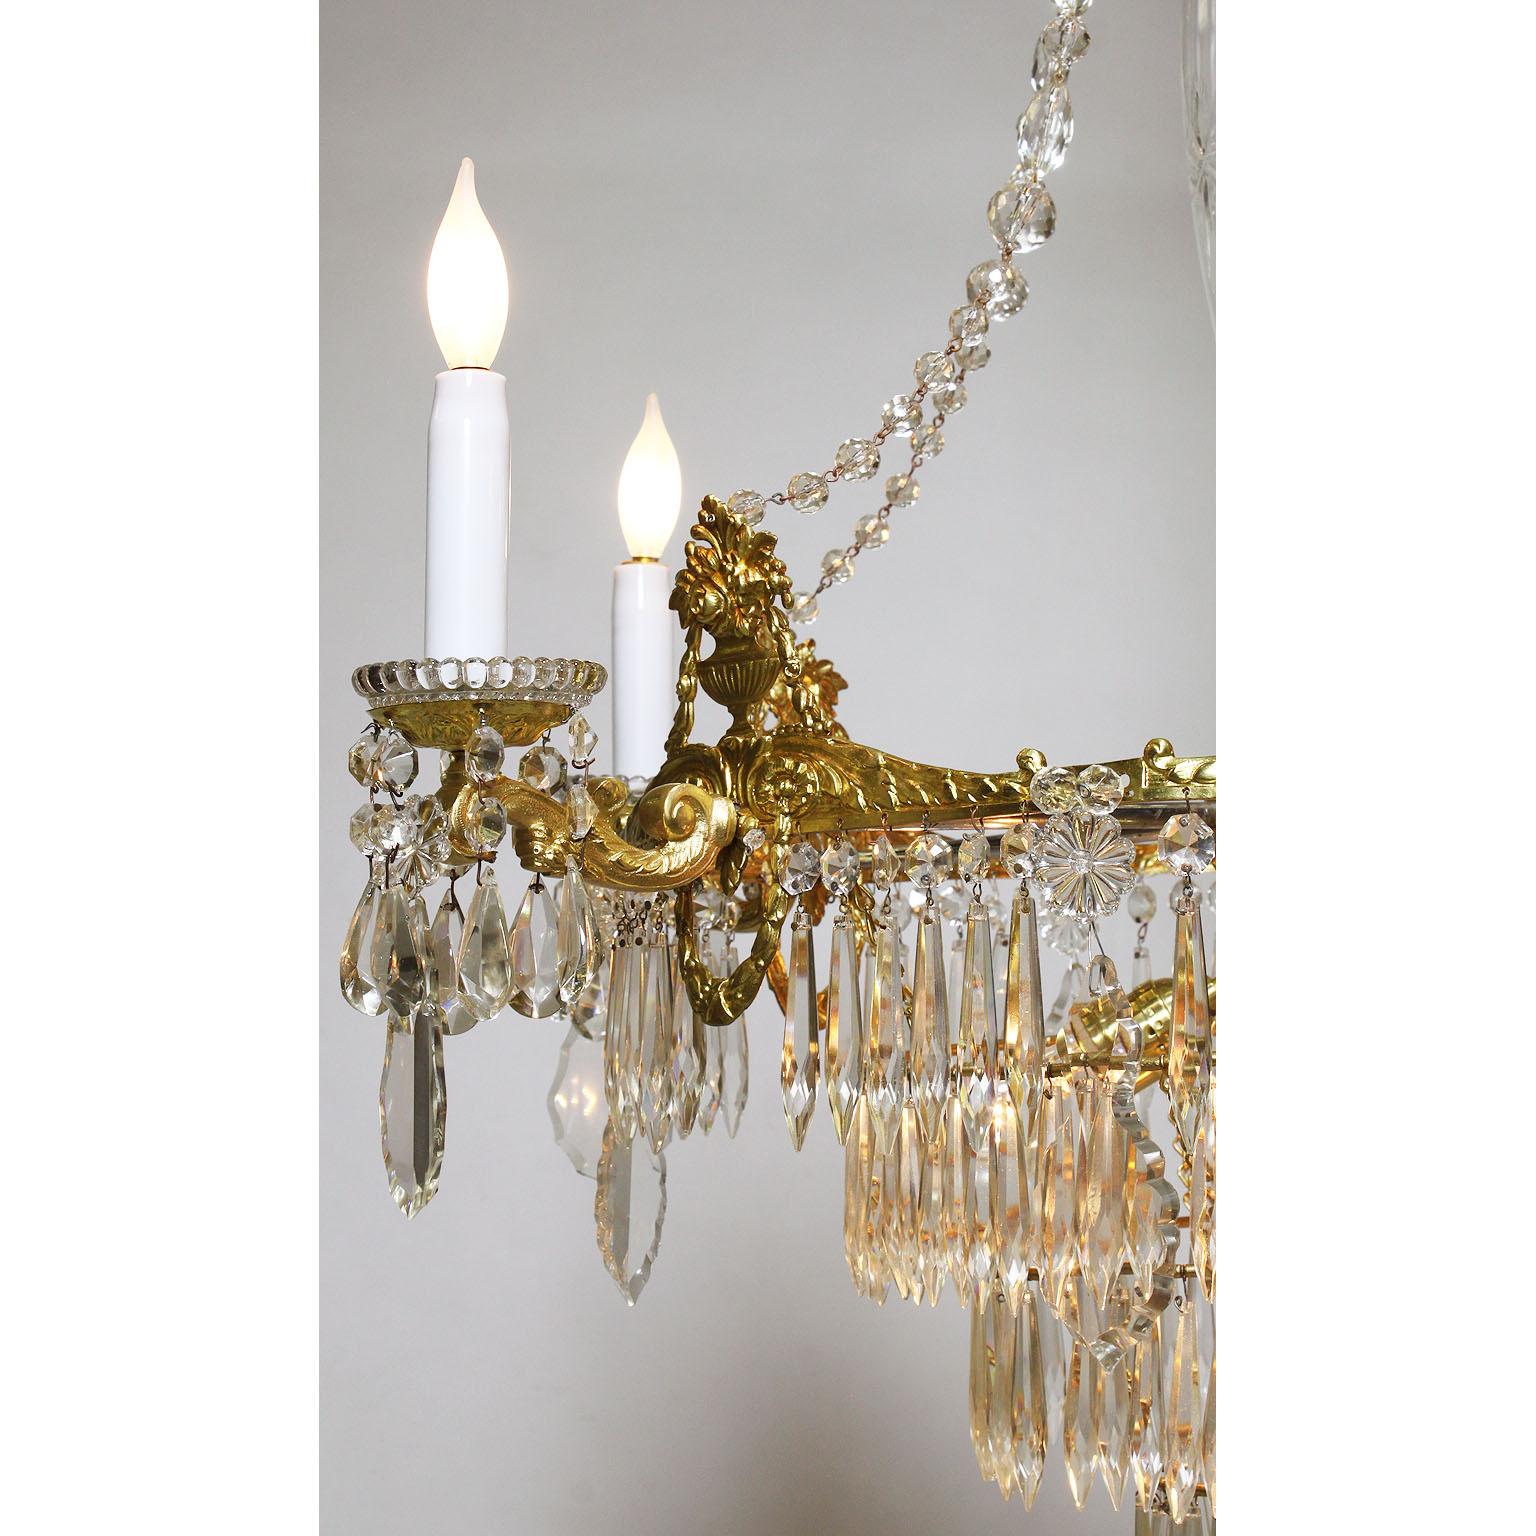 French 19th Century Neoclassical Revival Style Gilt-Metal & Cut-Glass Chandelier In Good Condition For Sale In Los Angeles, CA